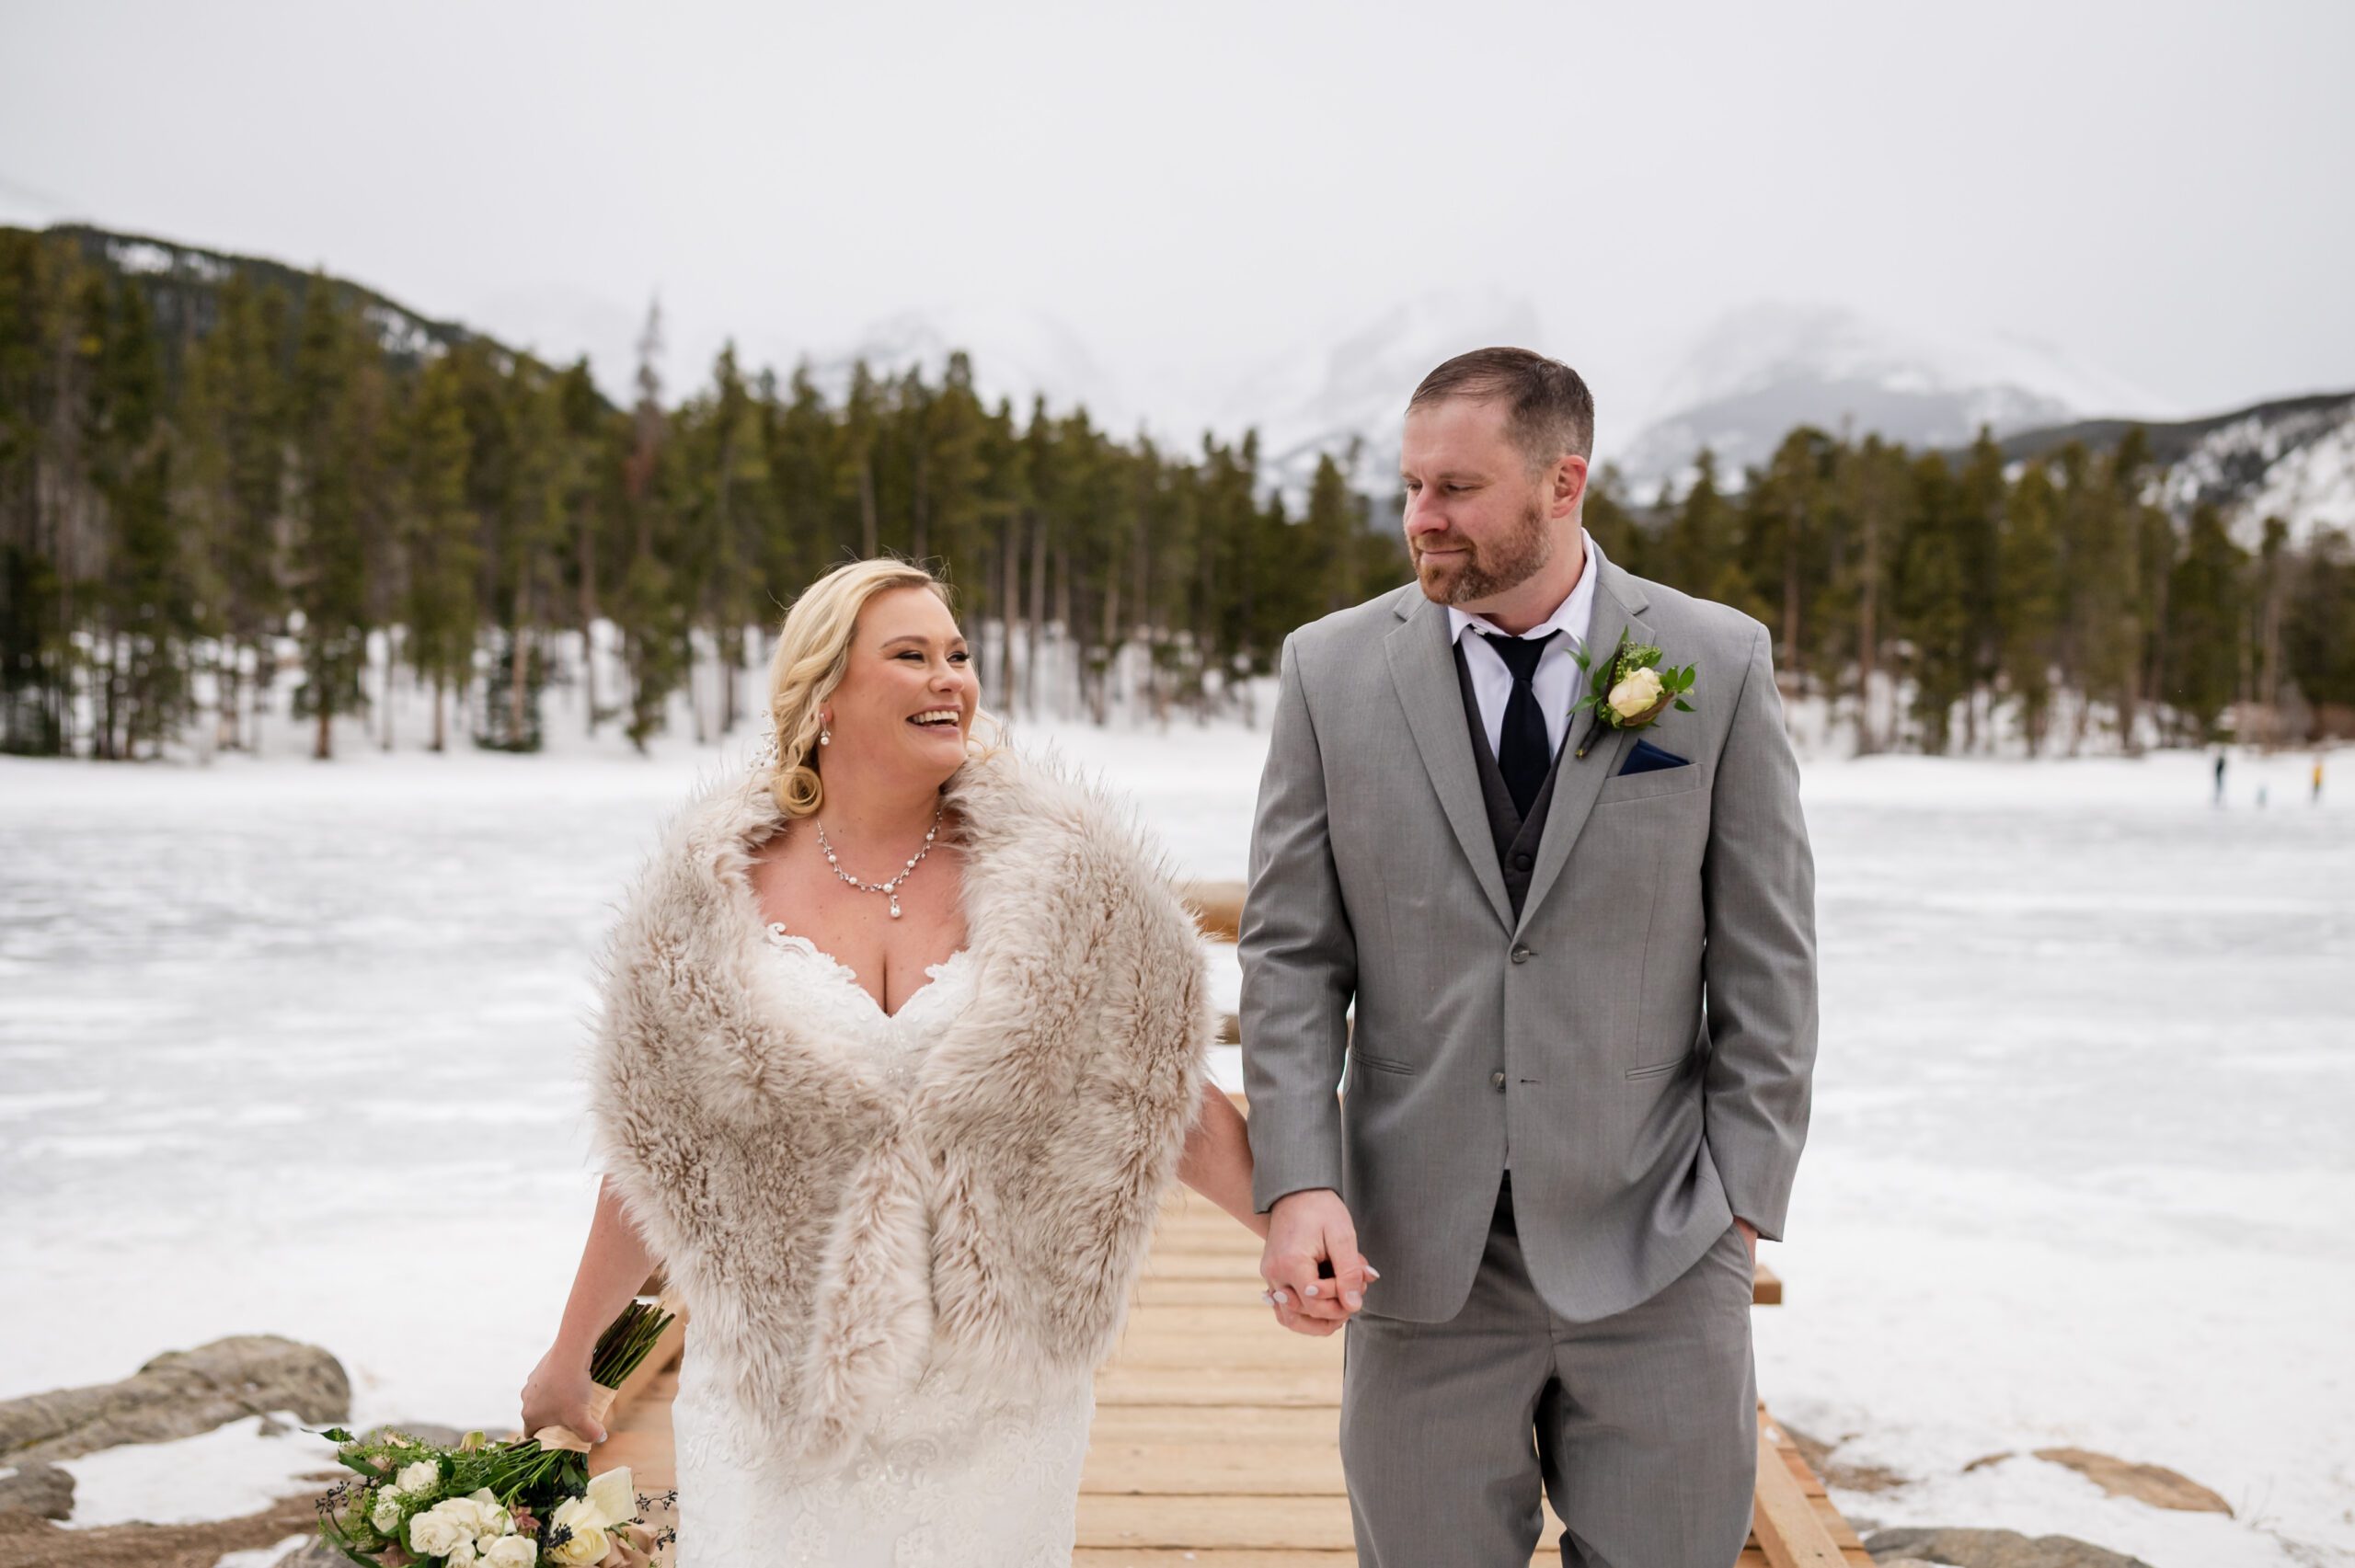 The bride and groom hold hands on the frozen lake after their Winter Elopement at Sprague Lake. 